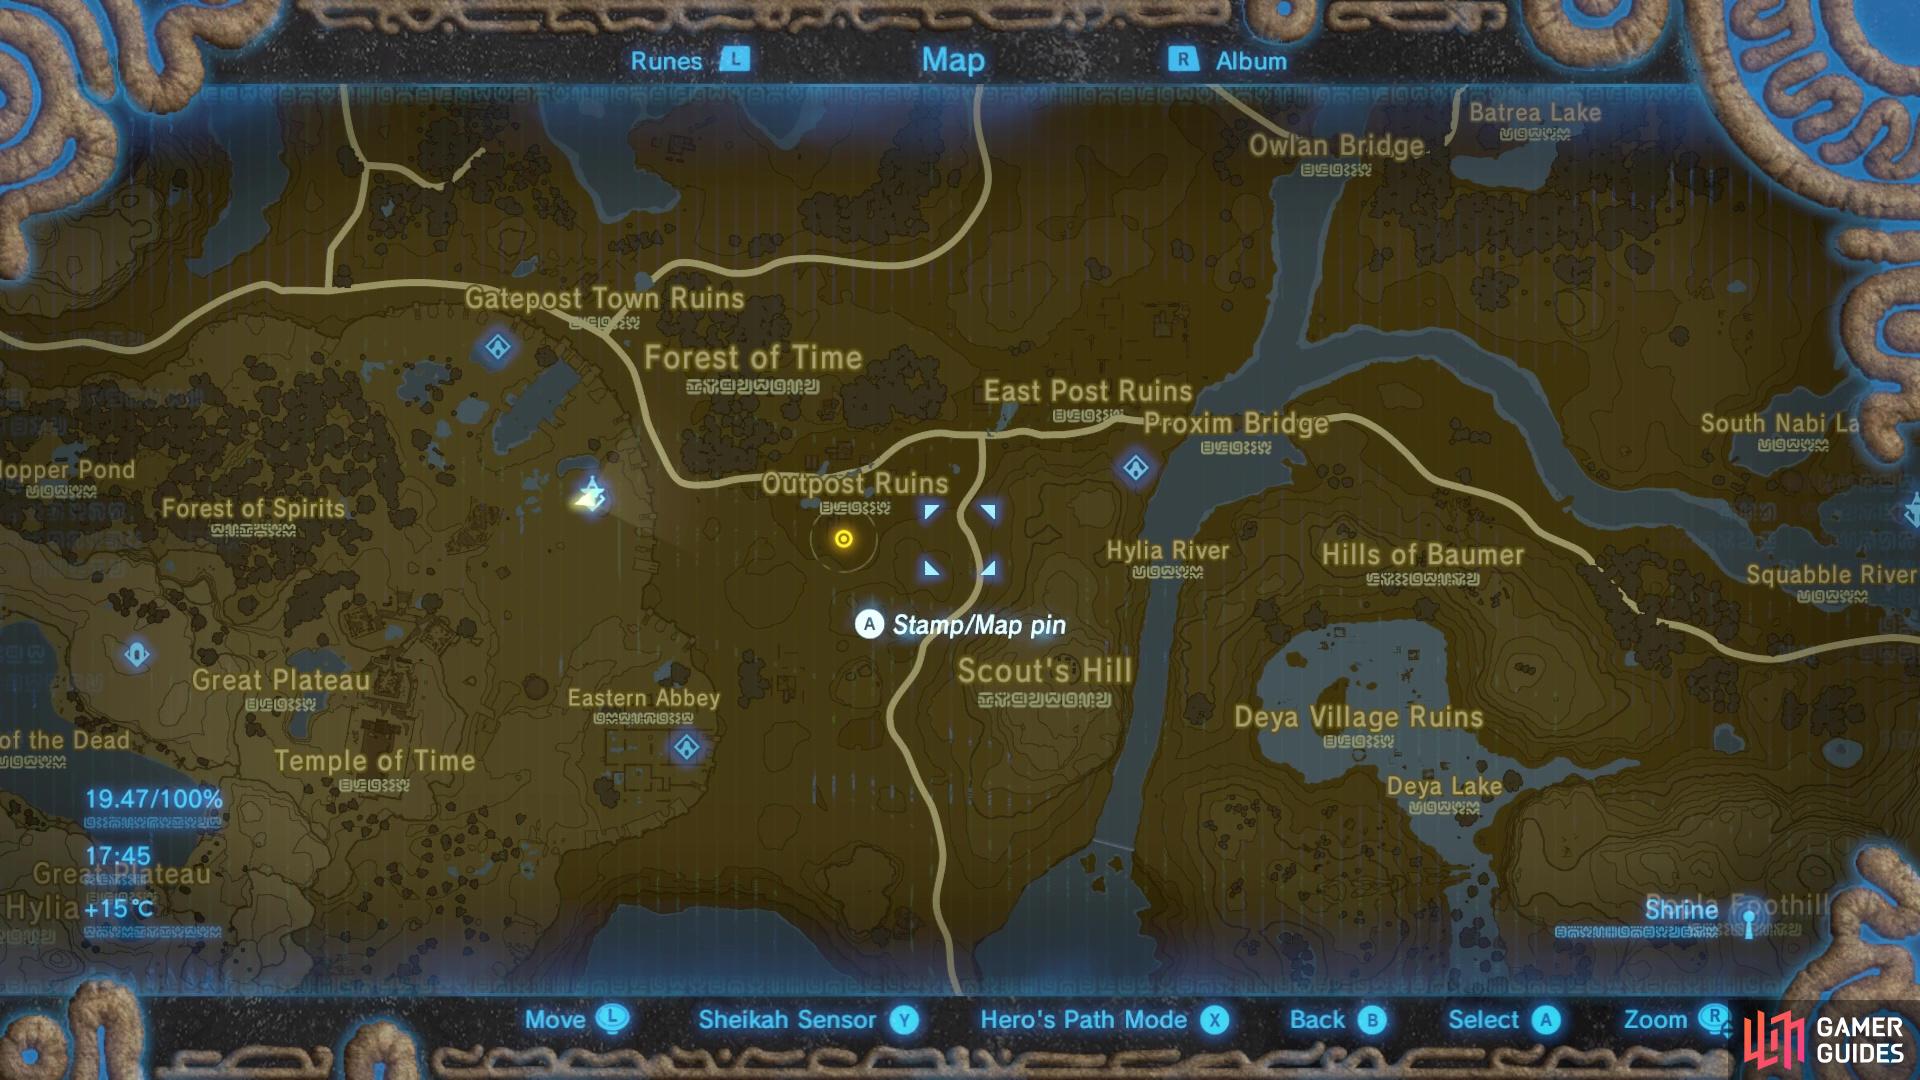 You'll be able to find a few nearby shrines to fast travel to to get to it easily.